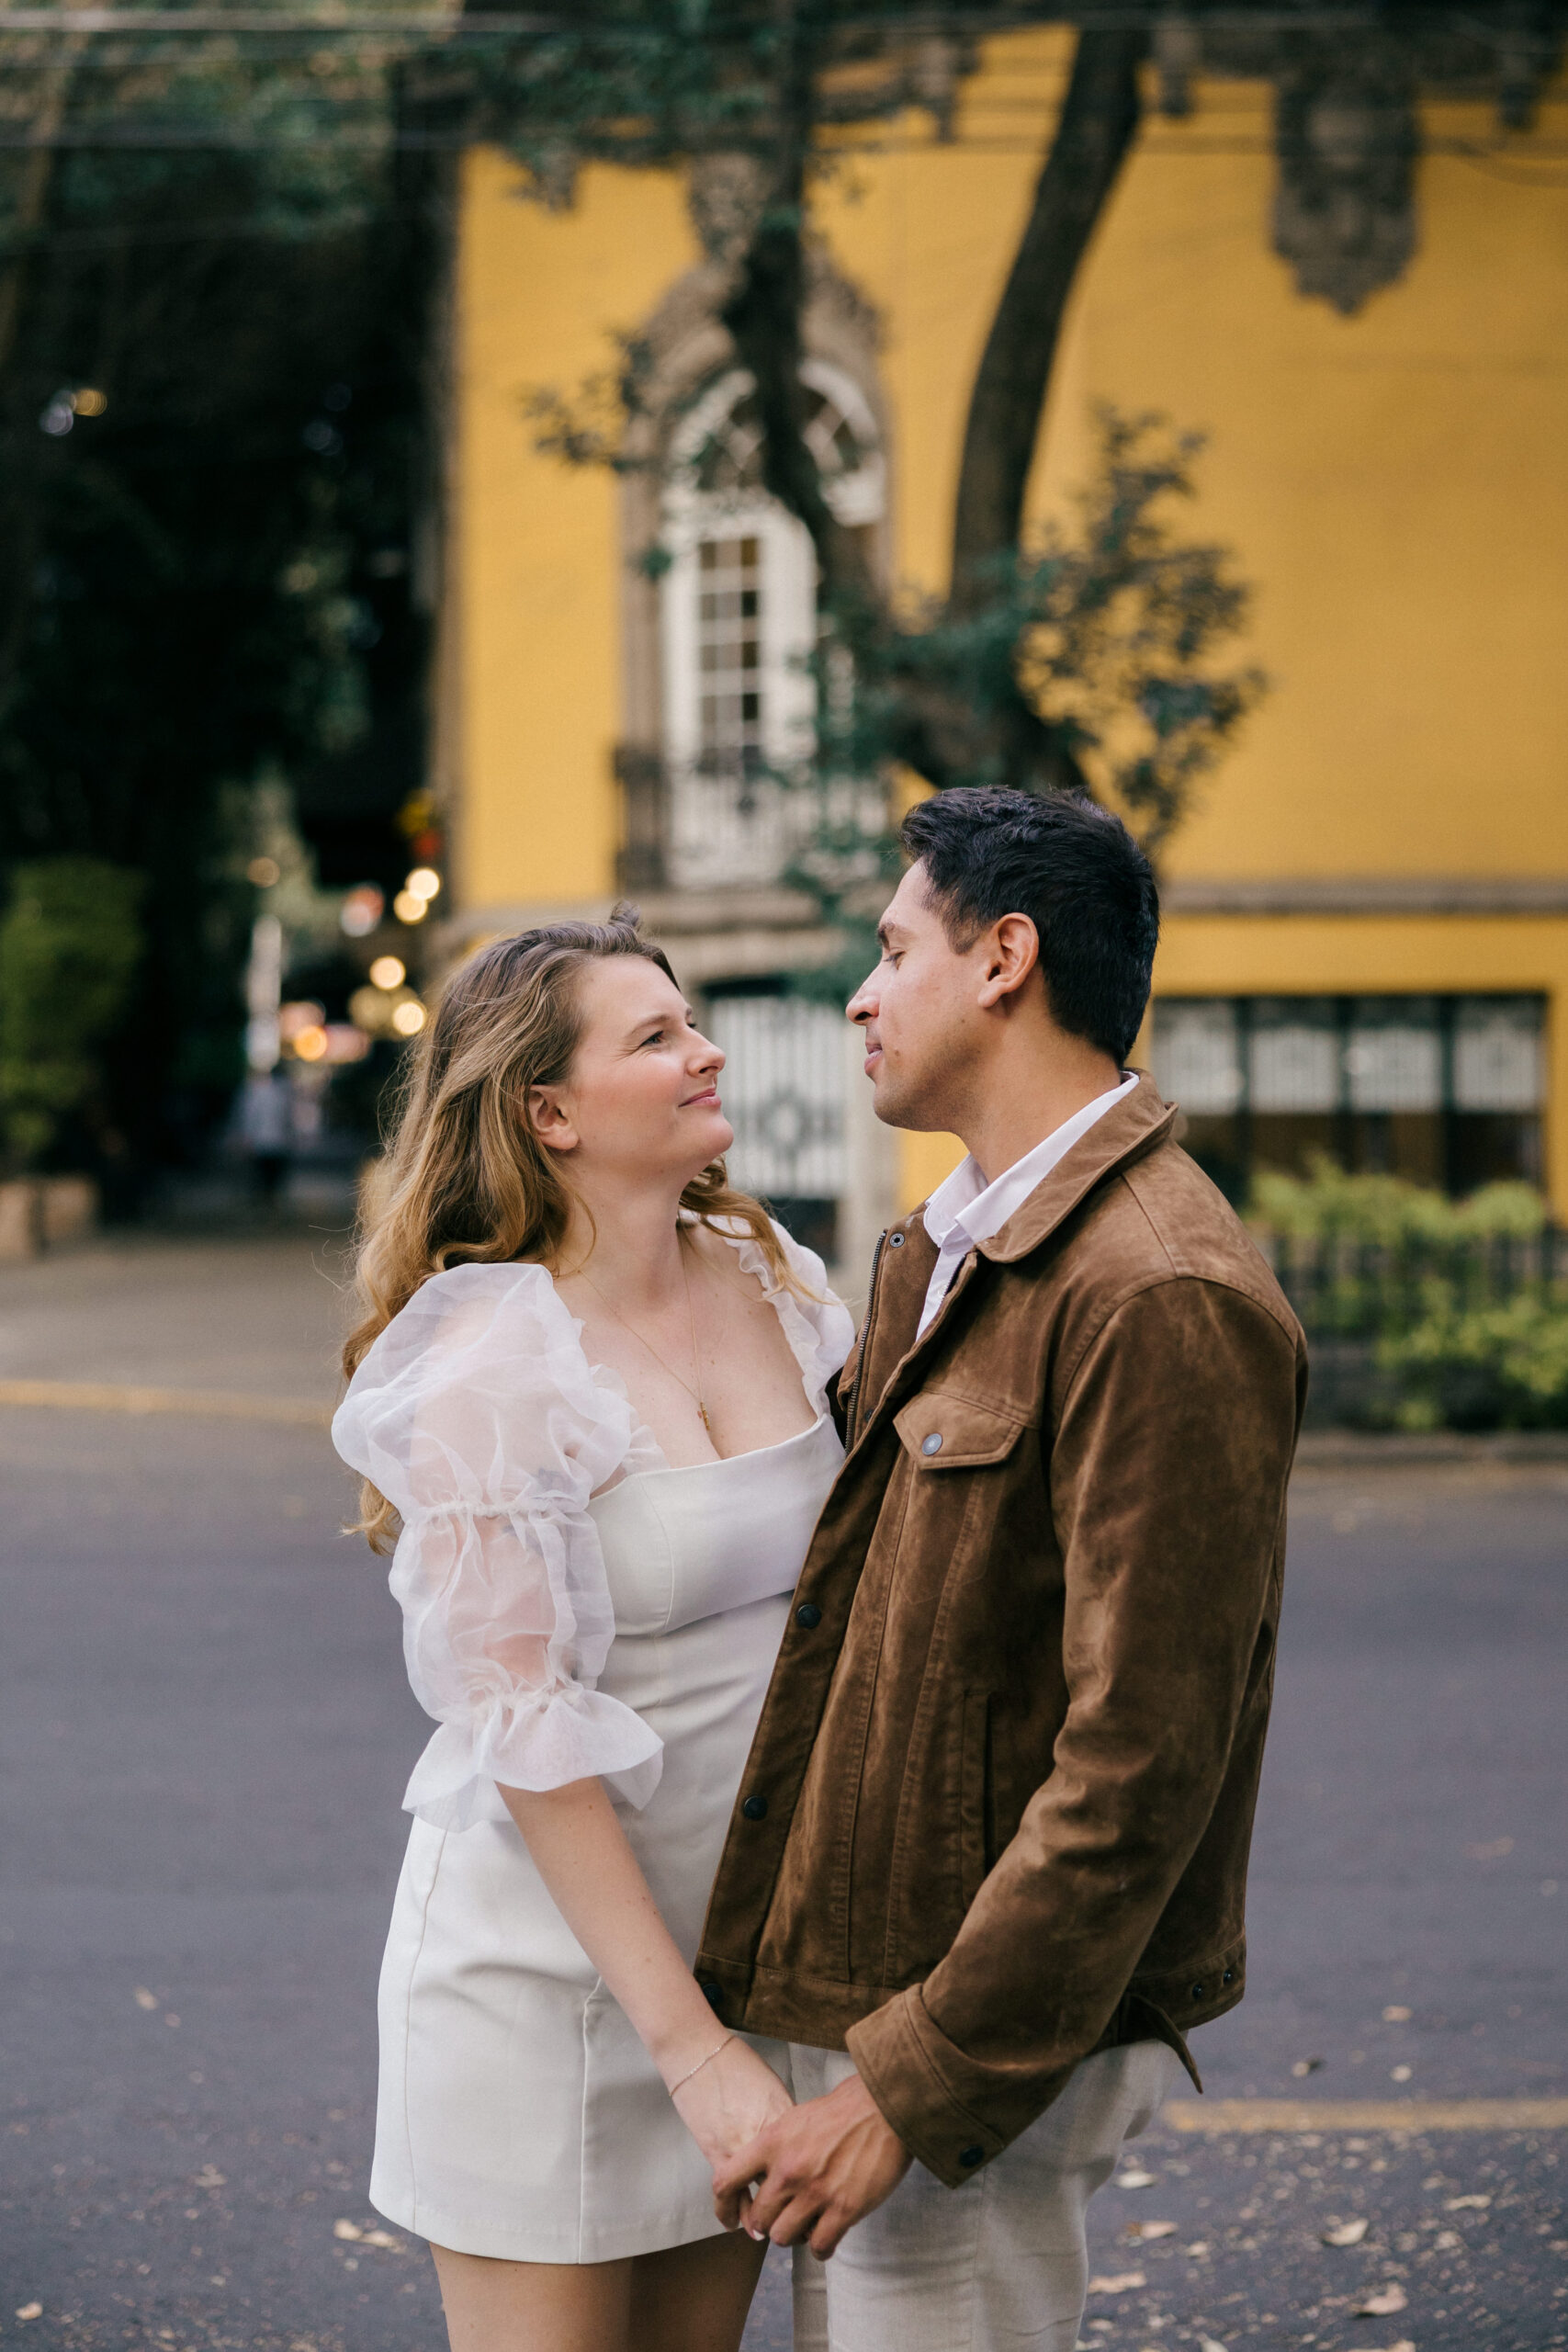 Beautiful couple pose together on the Mexico city streets with a yellow building in the background